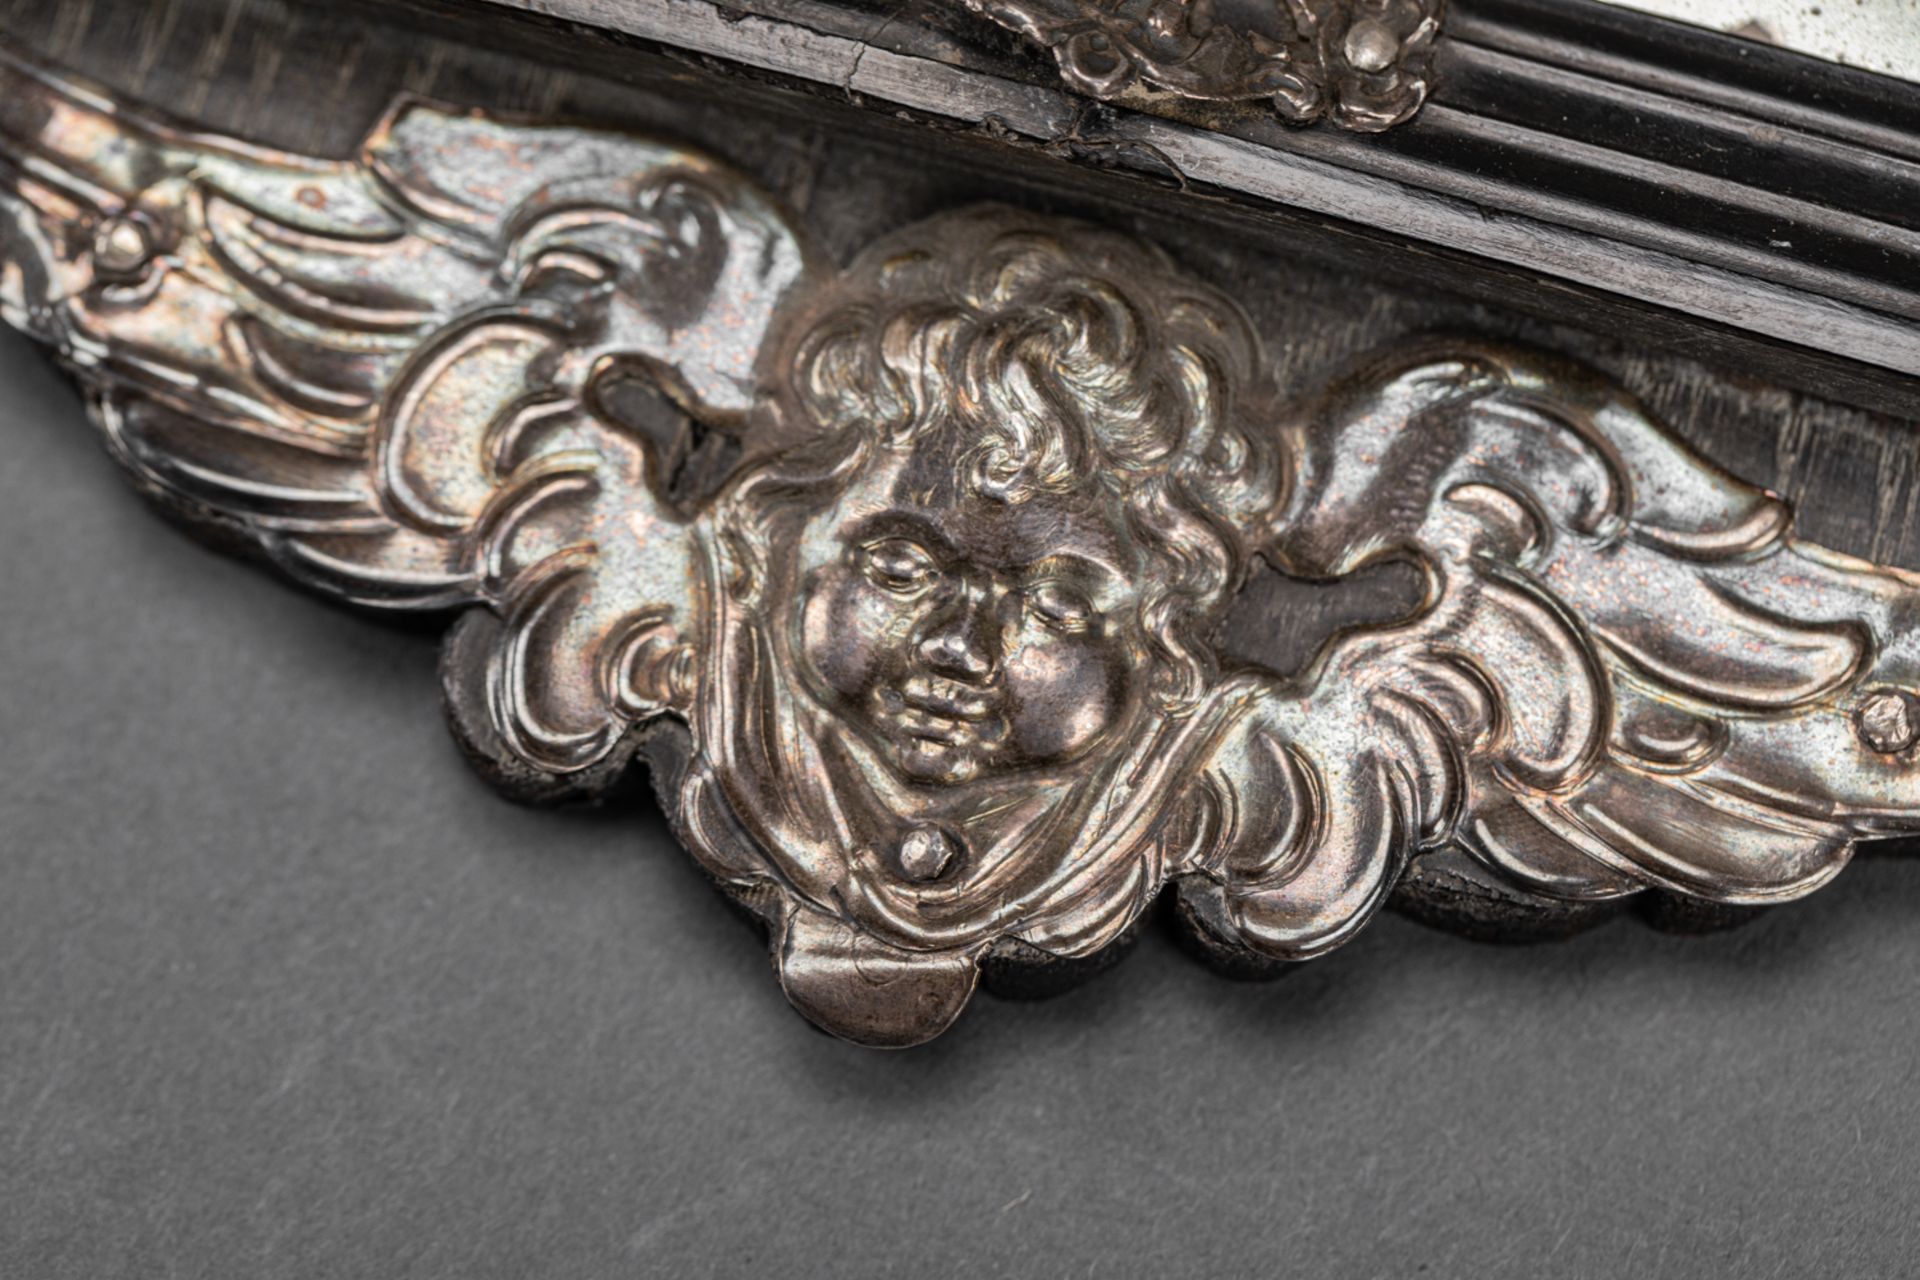 Italian mirror, chased silver ornaments on ebonised wooden frame, with coat of arms with two - Image 3 of 3